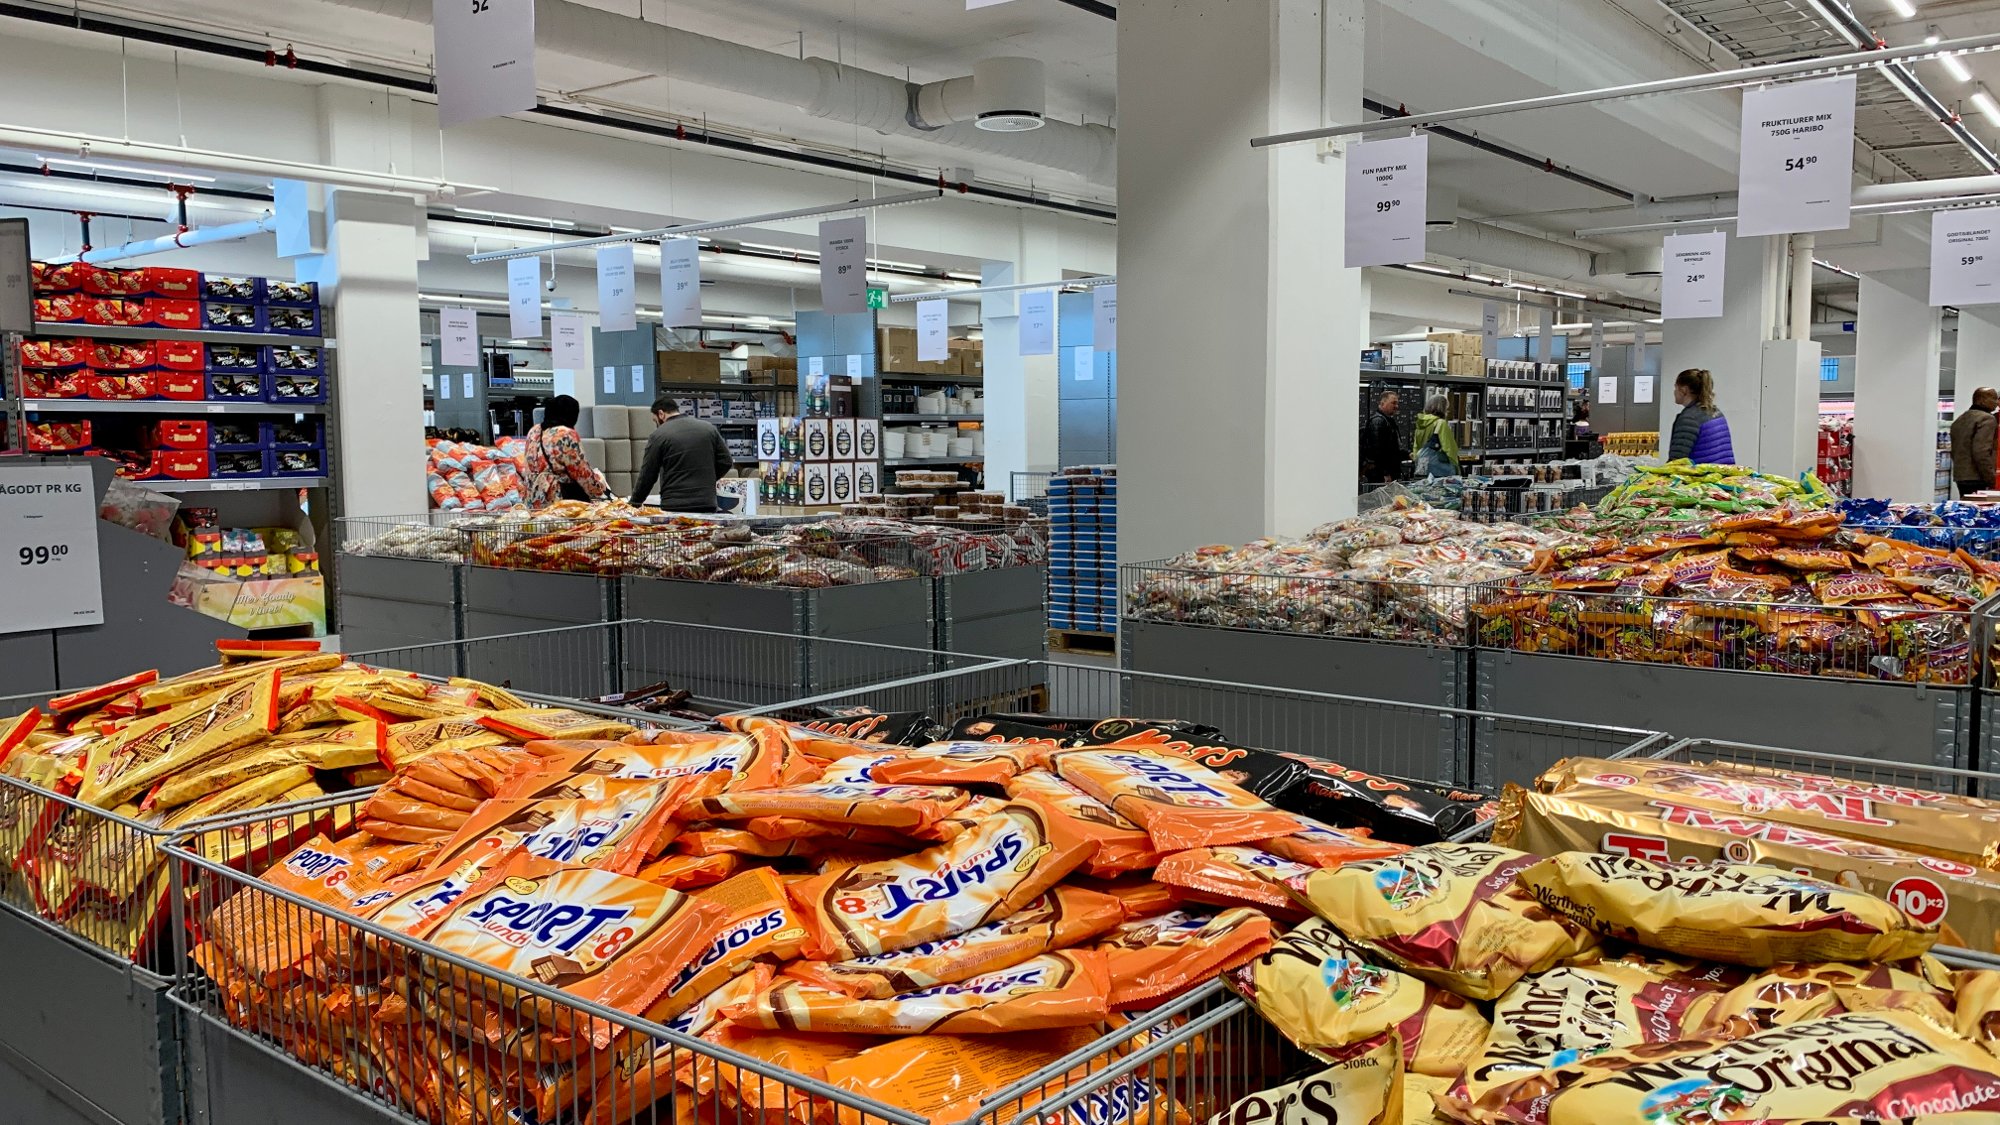 Consumer, Grocery |  Here, the cart is 1,300 NOK cheaper than a kiwi